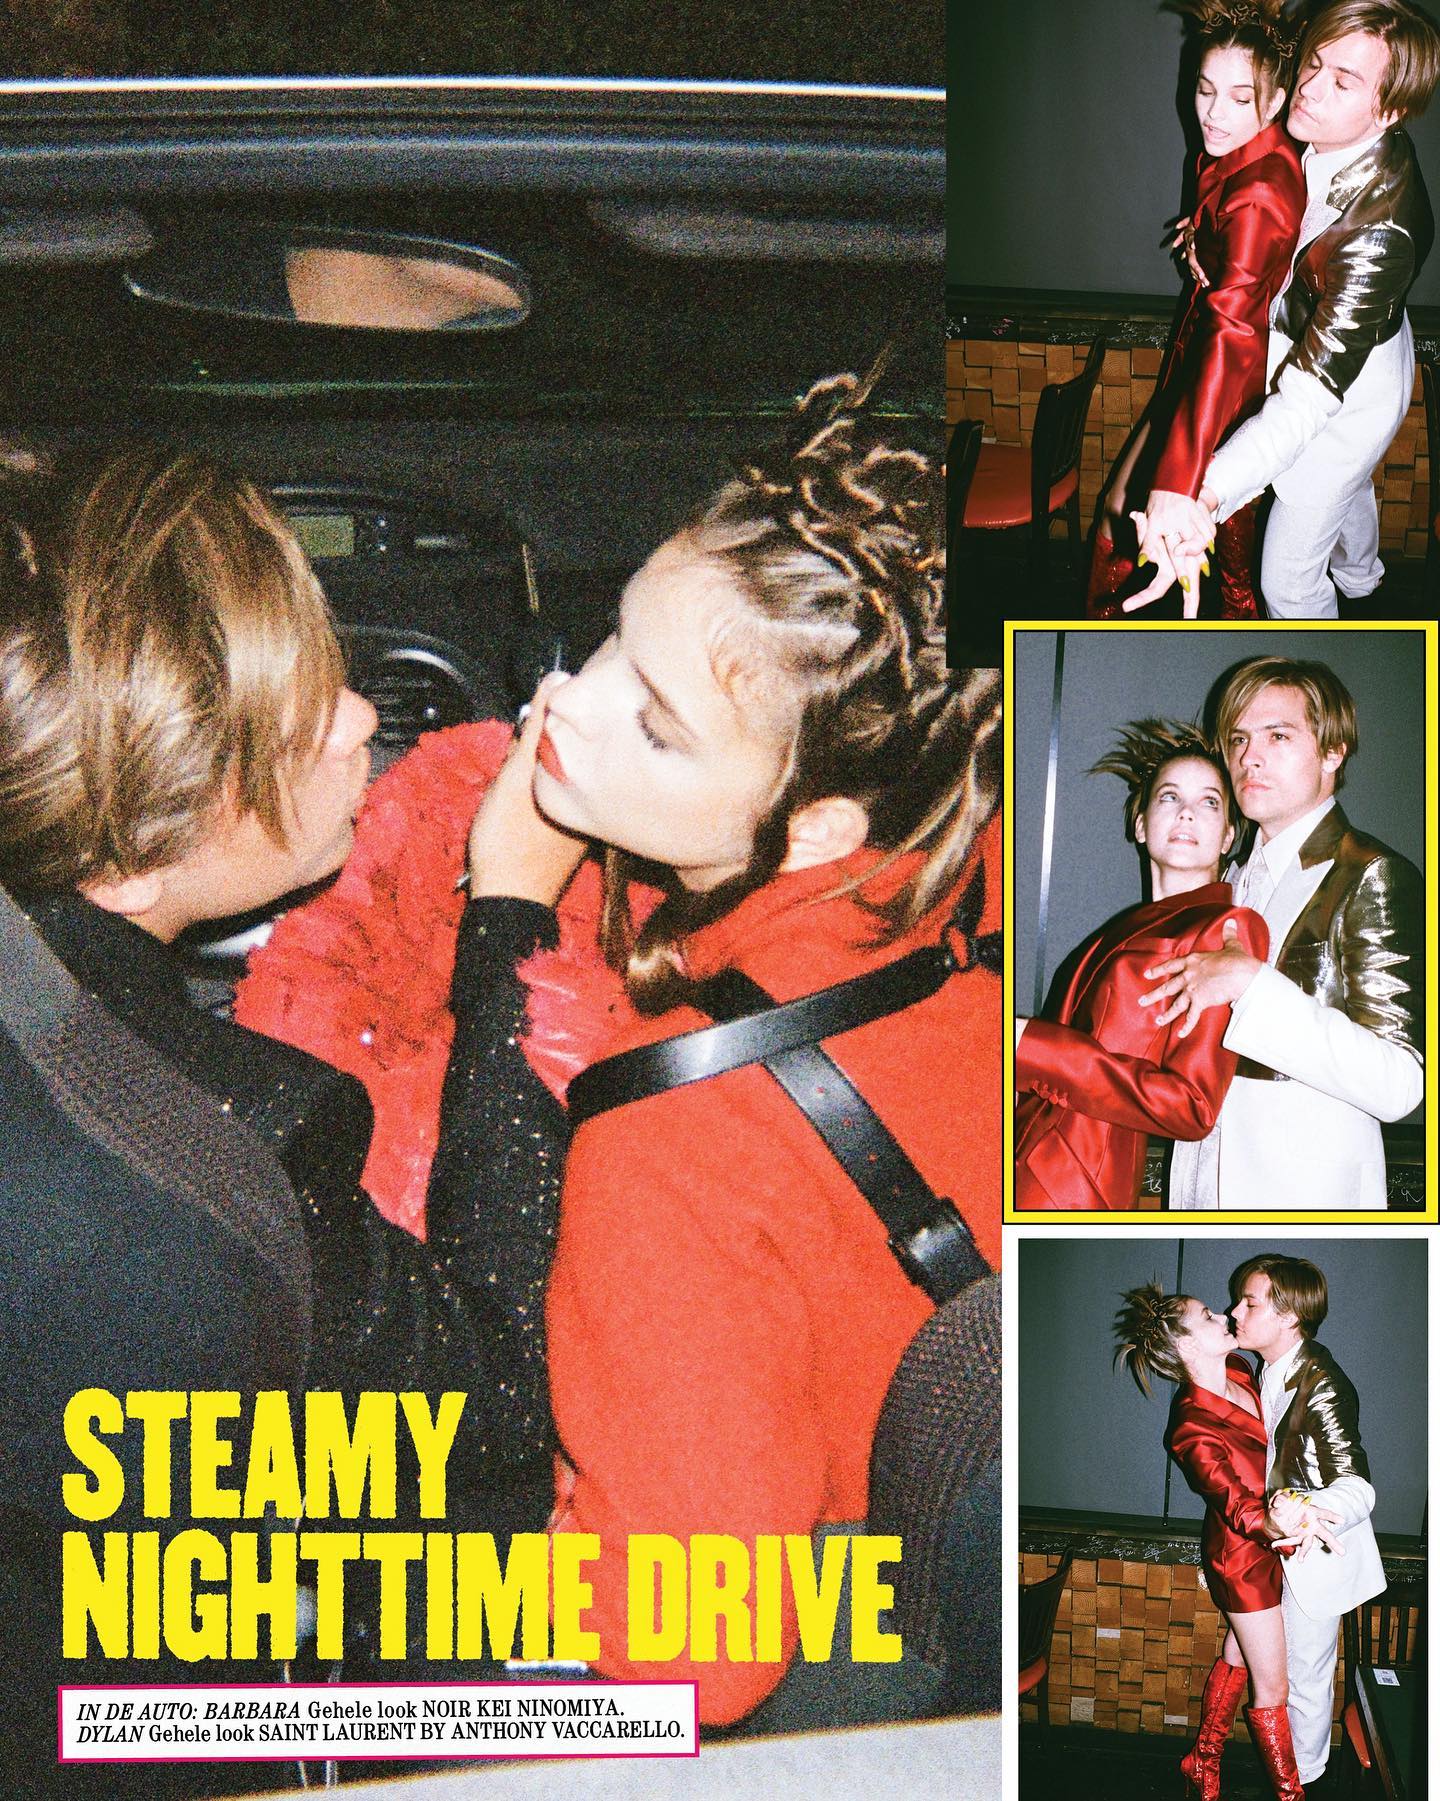 Barbara Palvin and Dylan Sprouse Hit the Cover! - Photo 4